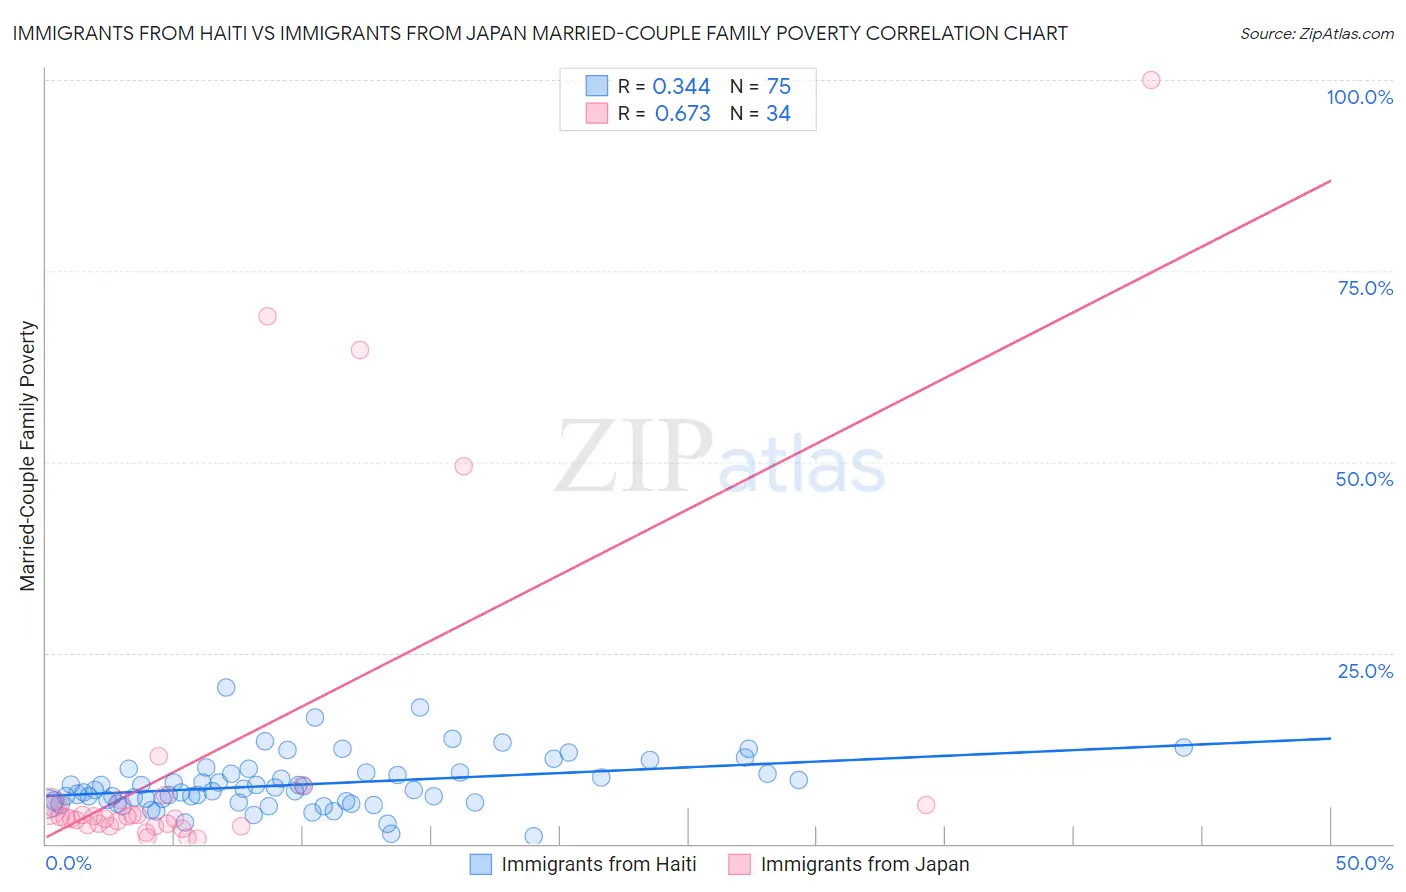 Immigrants from Haiti vs Immigrants from Japan Married-Couple Family Poverty